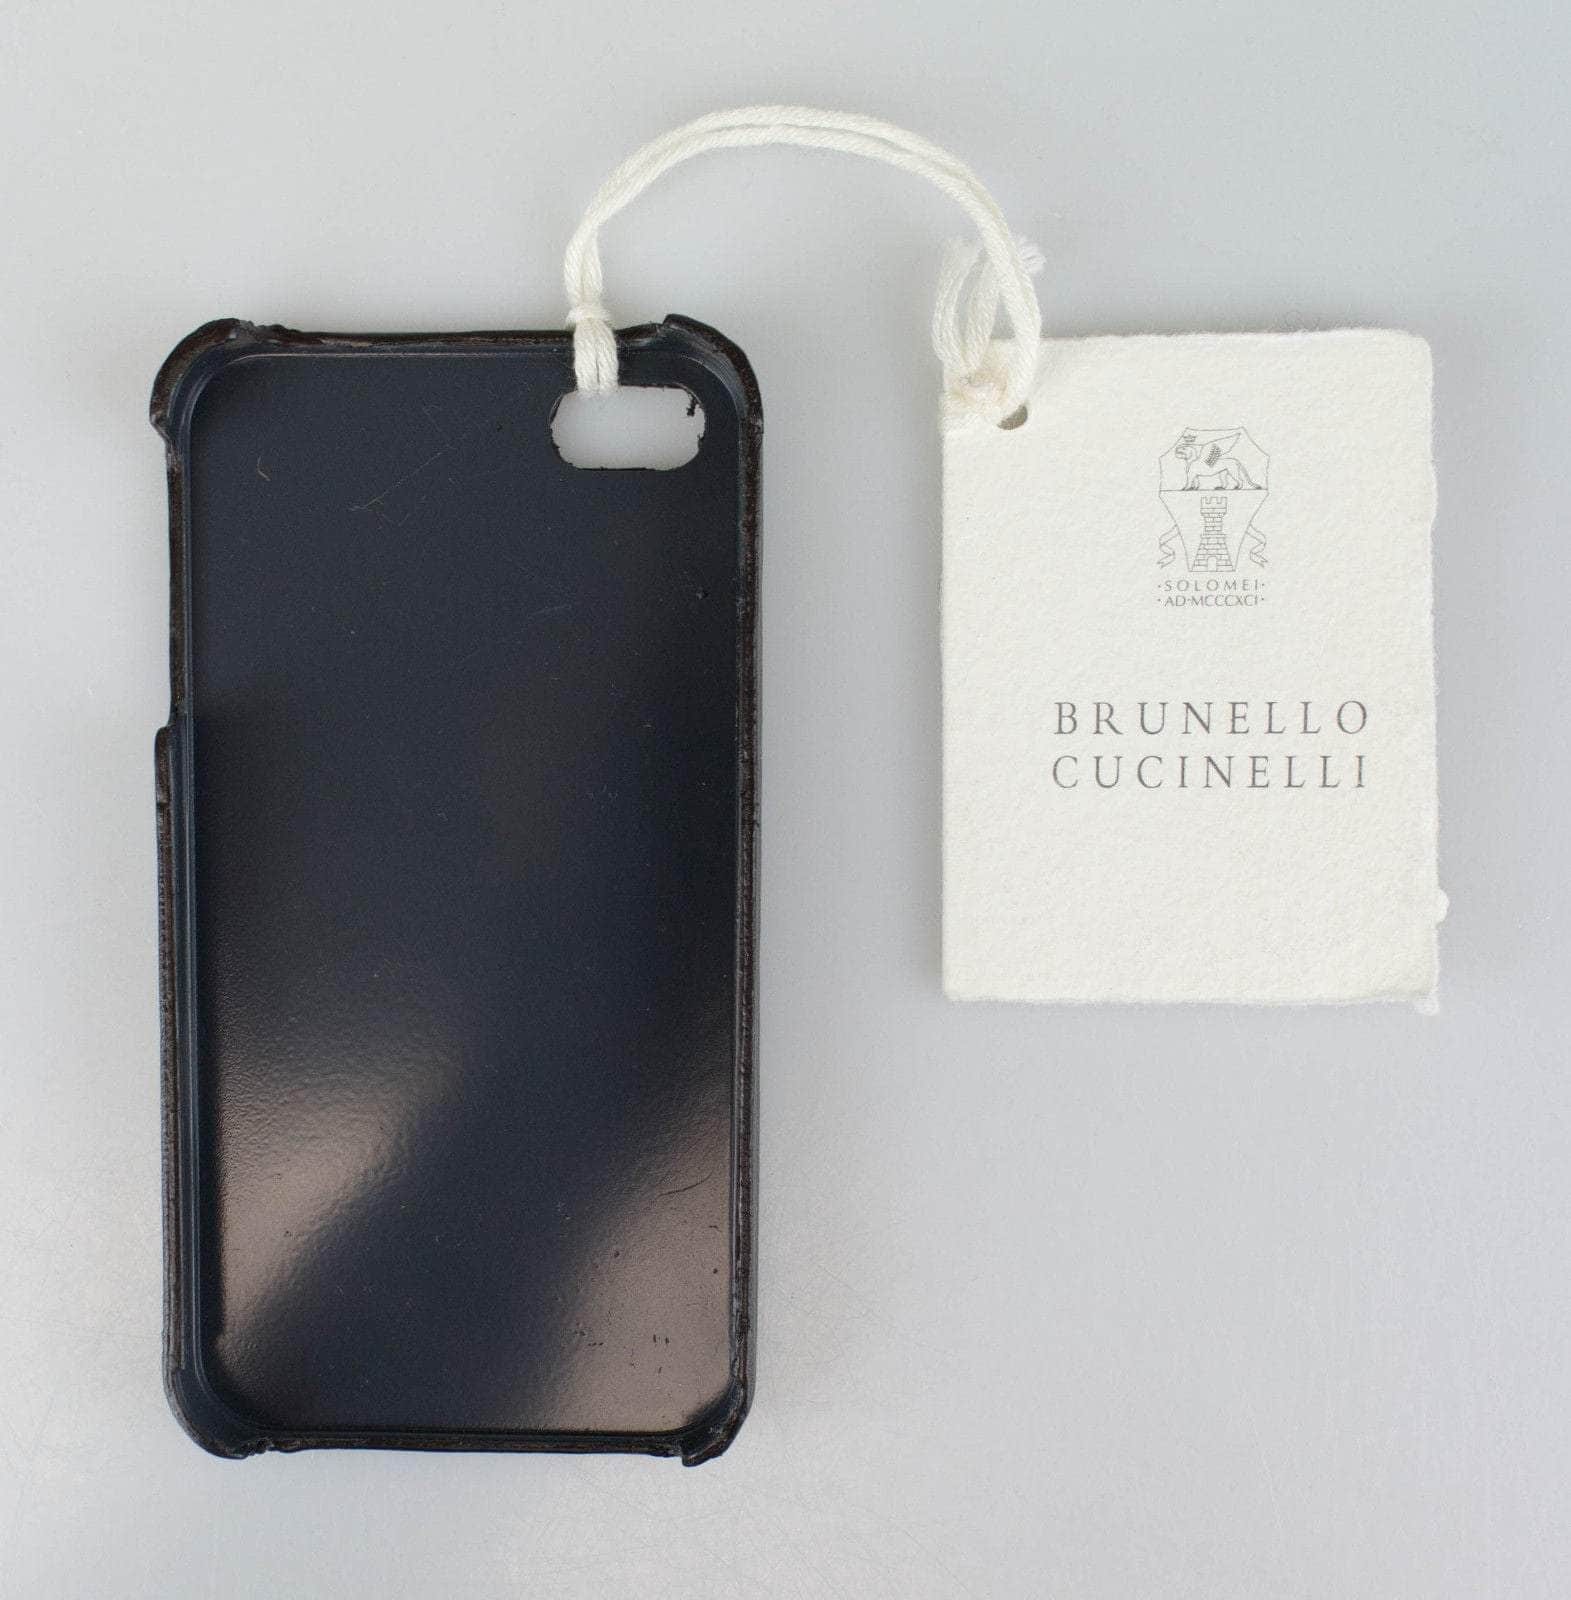 Brunello Cucinelli brunello-cucinelli, channelenable-all, chicmi, couponcollection, gender-mens, gender-womens, main-accessories, mens-shoes, size-os, under-250, unisex-phone-cases OS Ash Gray Leather Iphone Case JF1-410 JF1-410